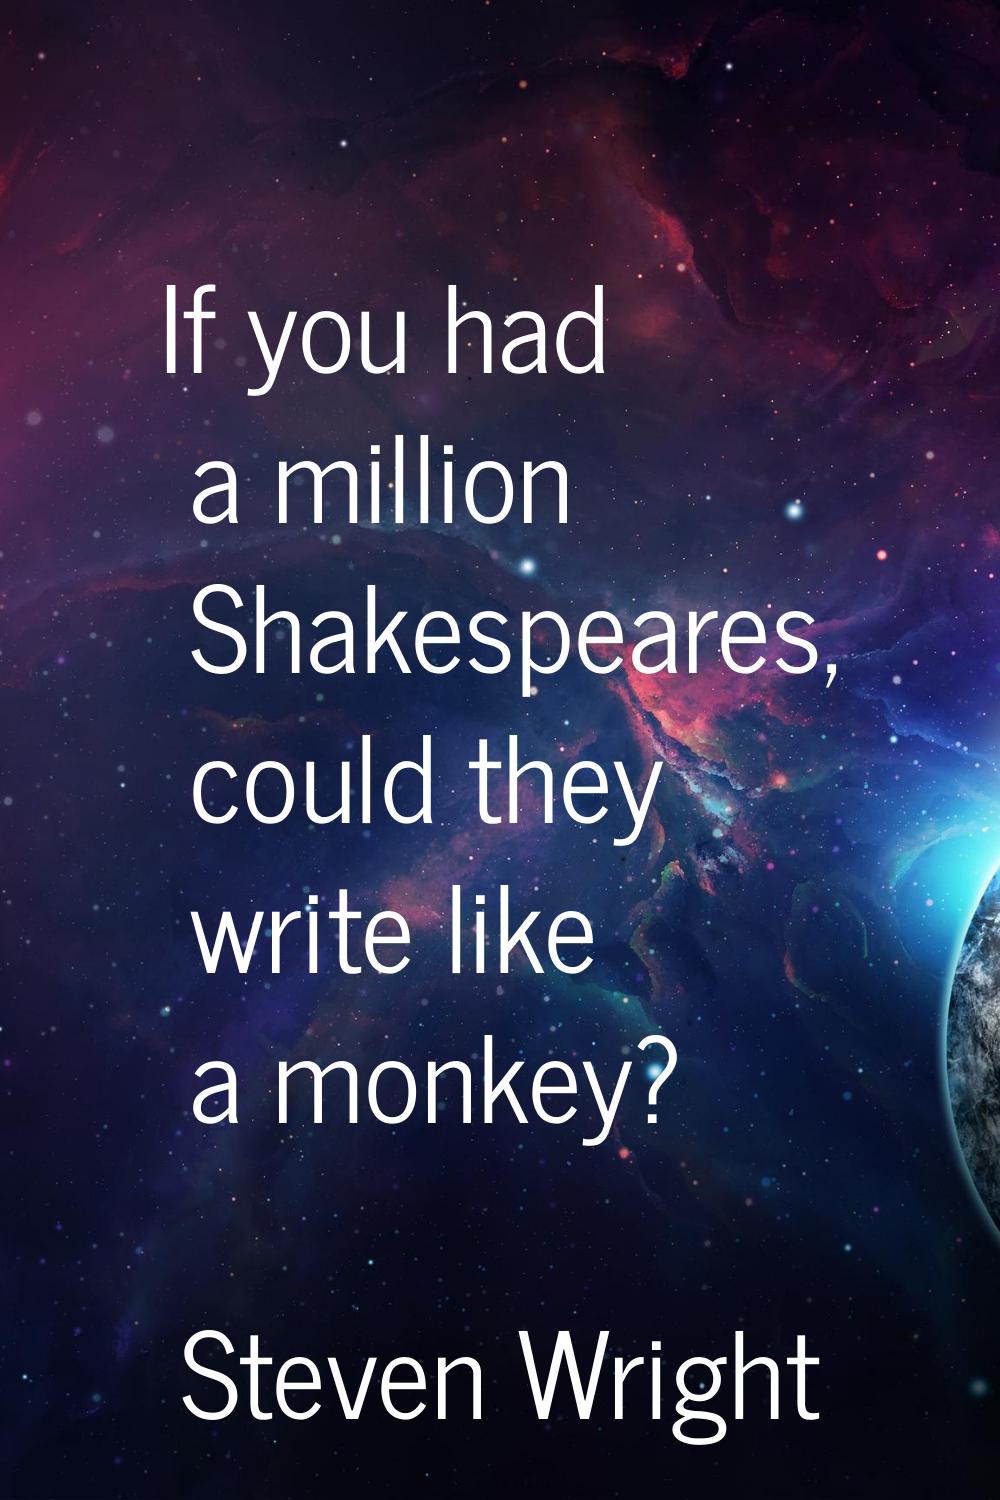 If you had a million Shakespeares, could they write like a monkey?